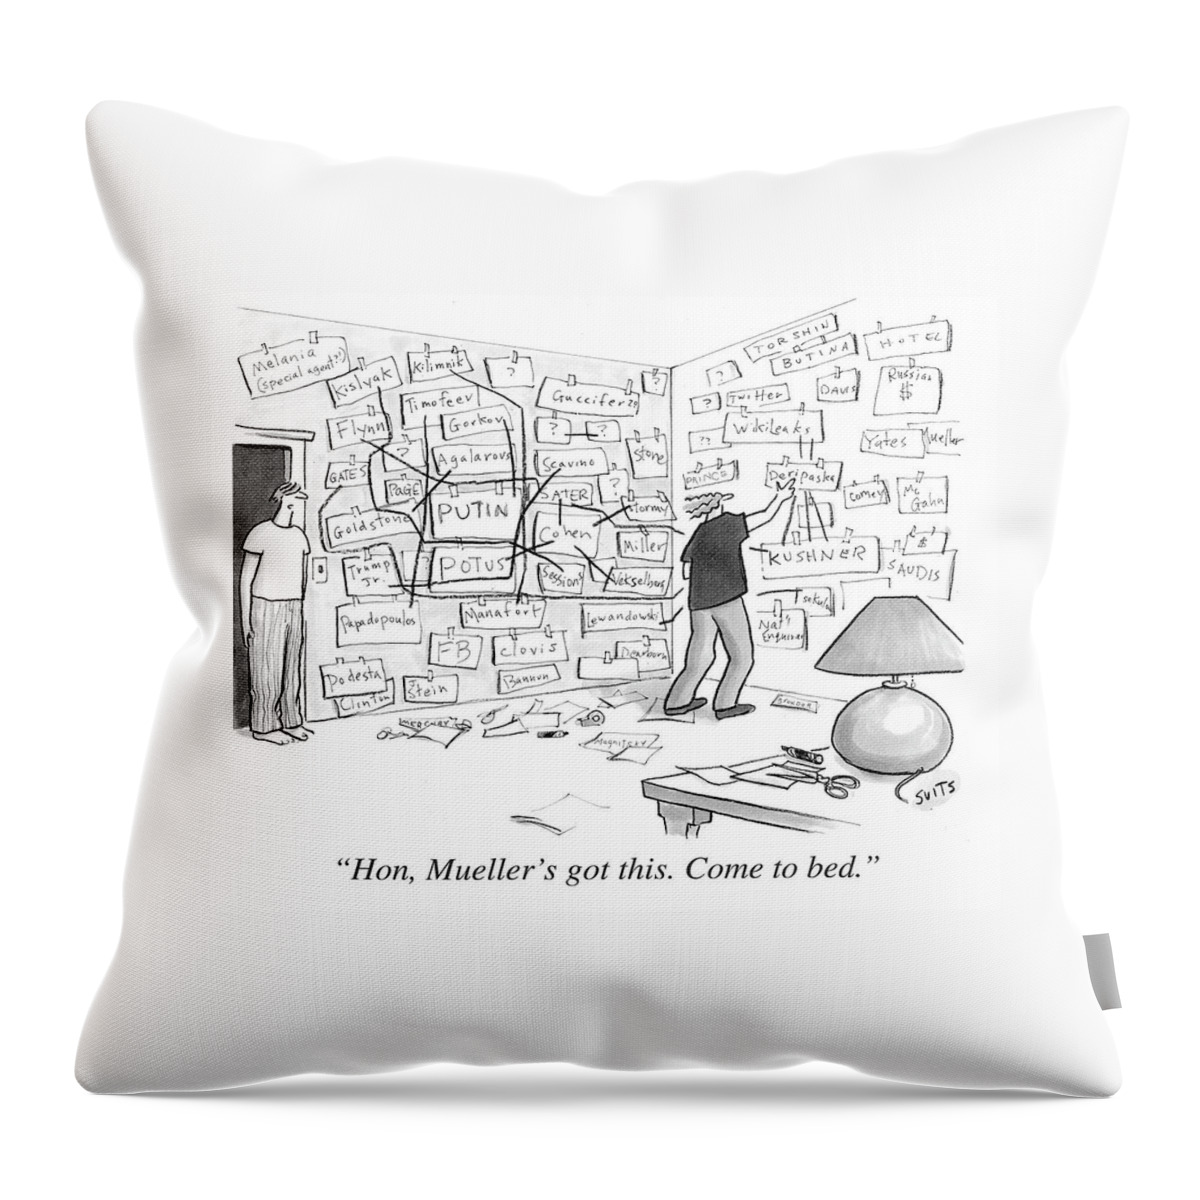 Hon, Mueller's Got This. Come To Bed. Throw Pillow